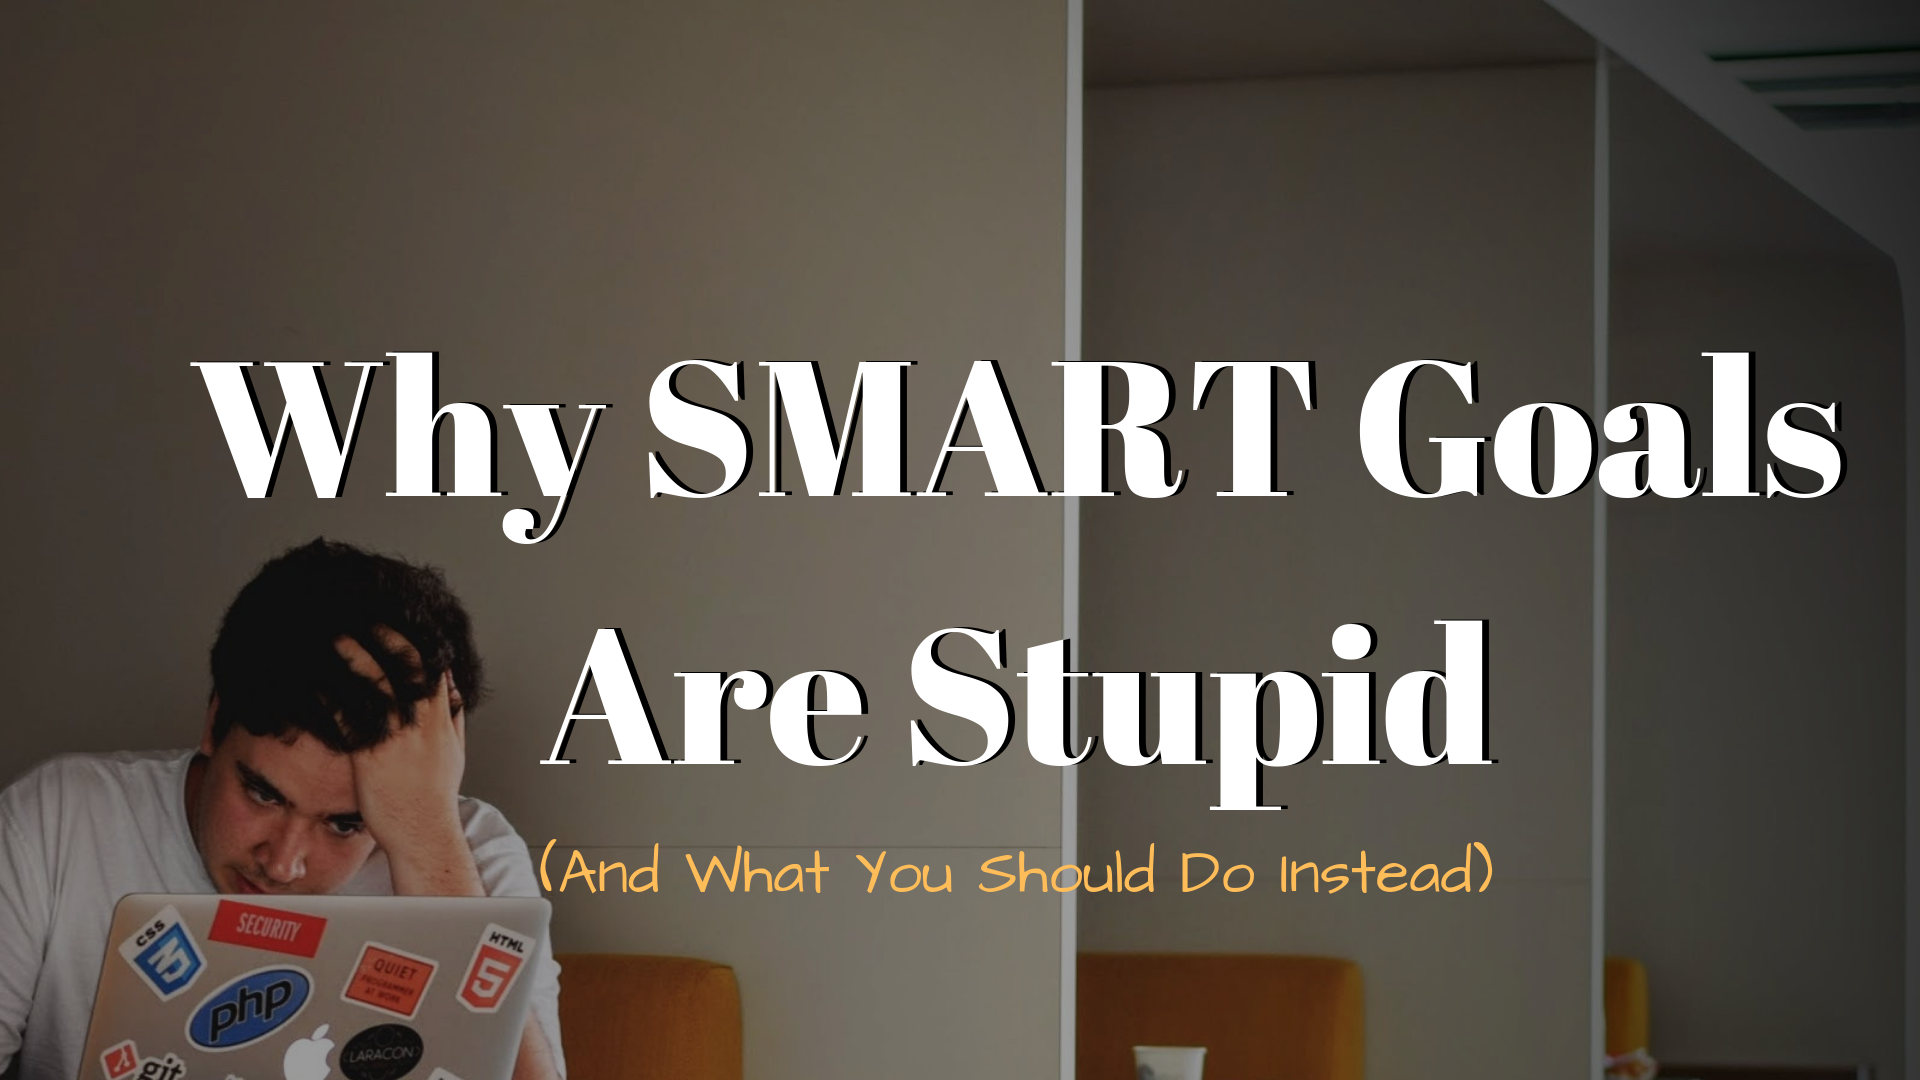 Why SMART Goals Are Stupid (And what to do instead)